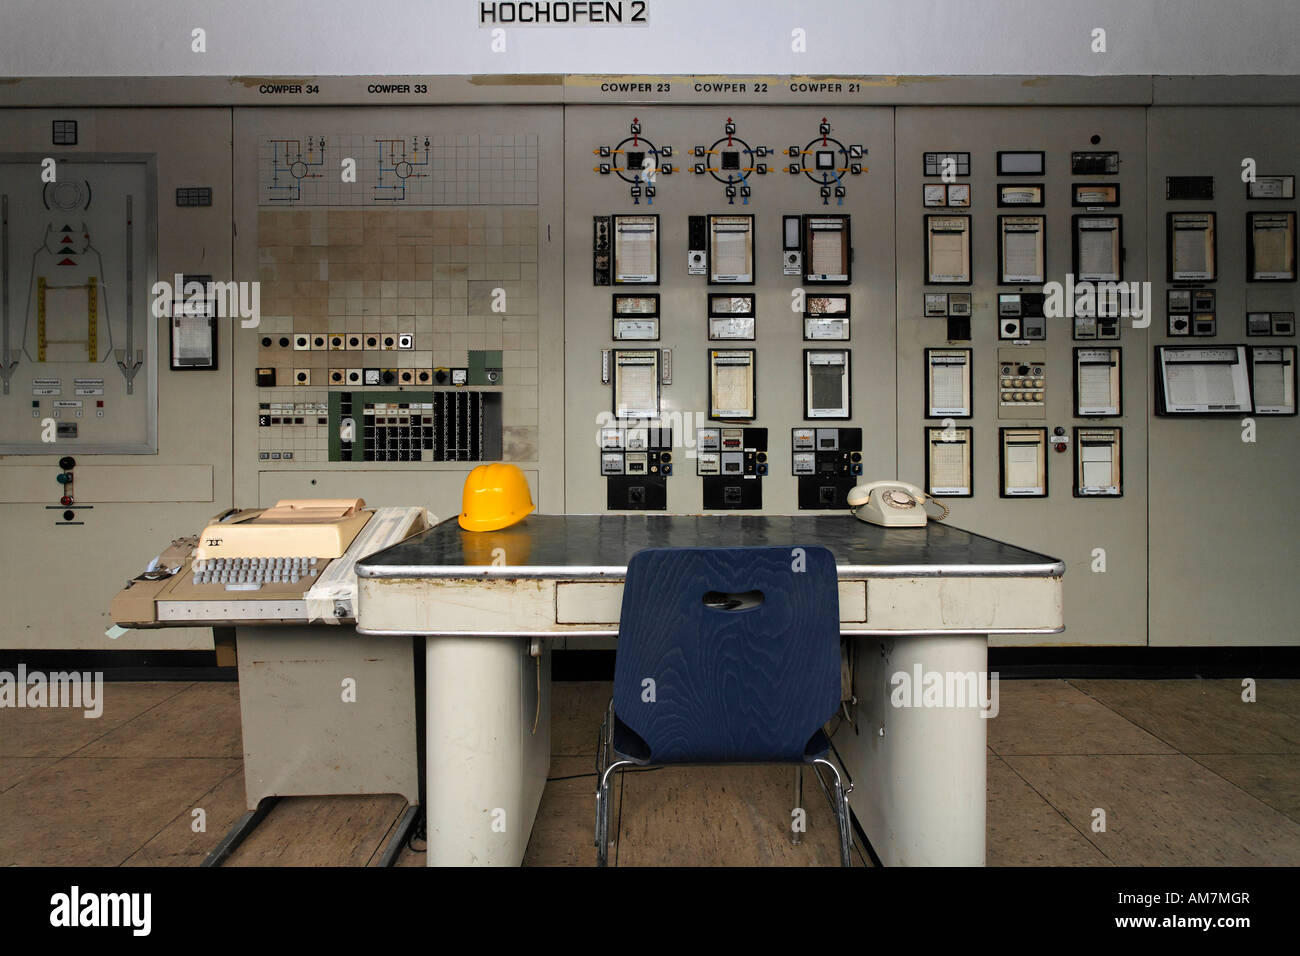 Control room of the blast furnace, disused ironworks Henrichshuette,  industrial museum, Hattingen, NRW, Germany Stock Photo - Alamy